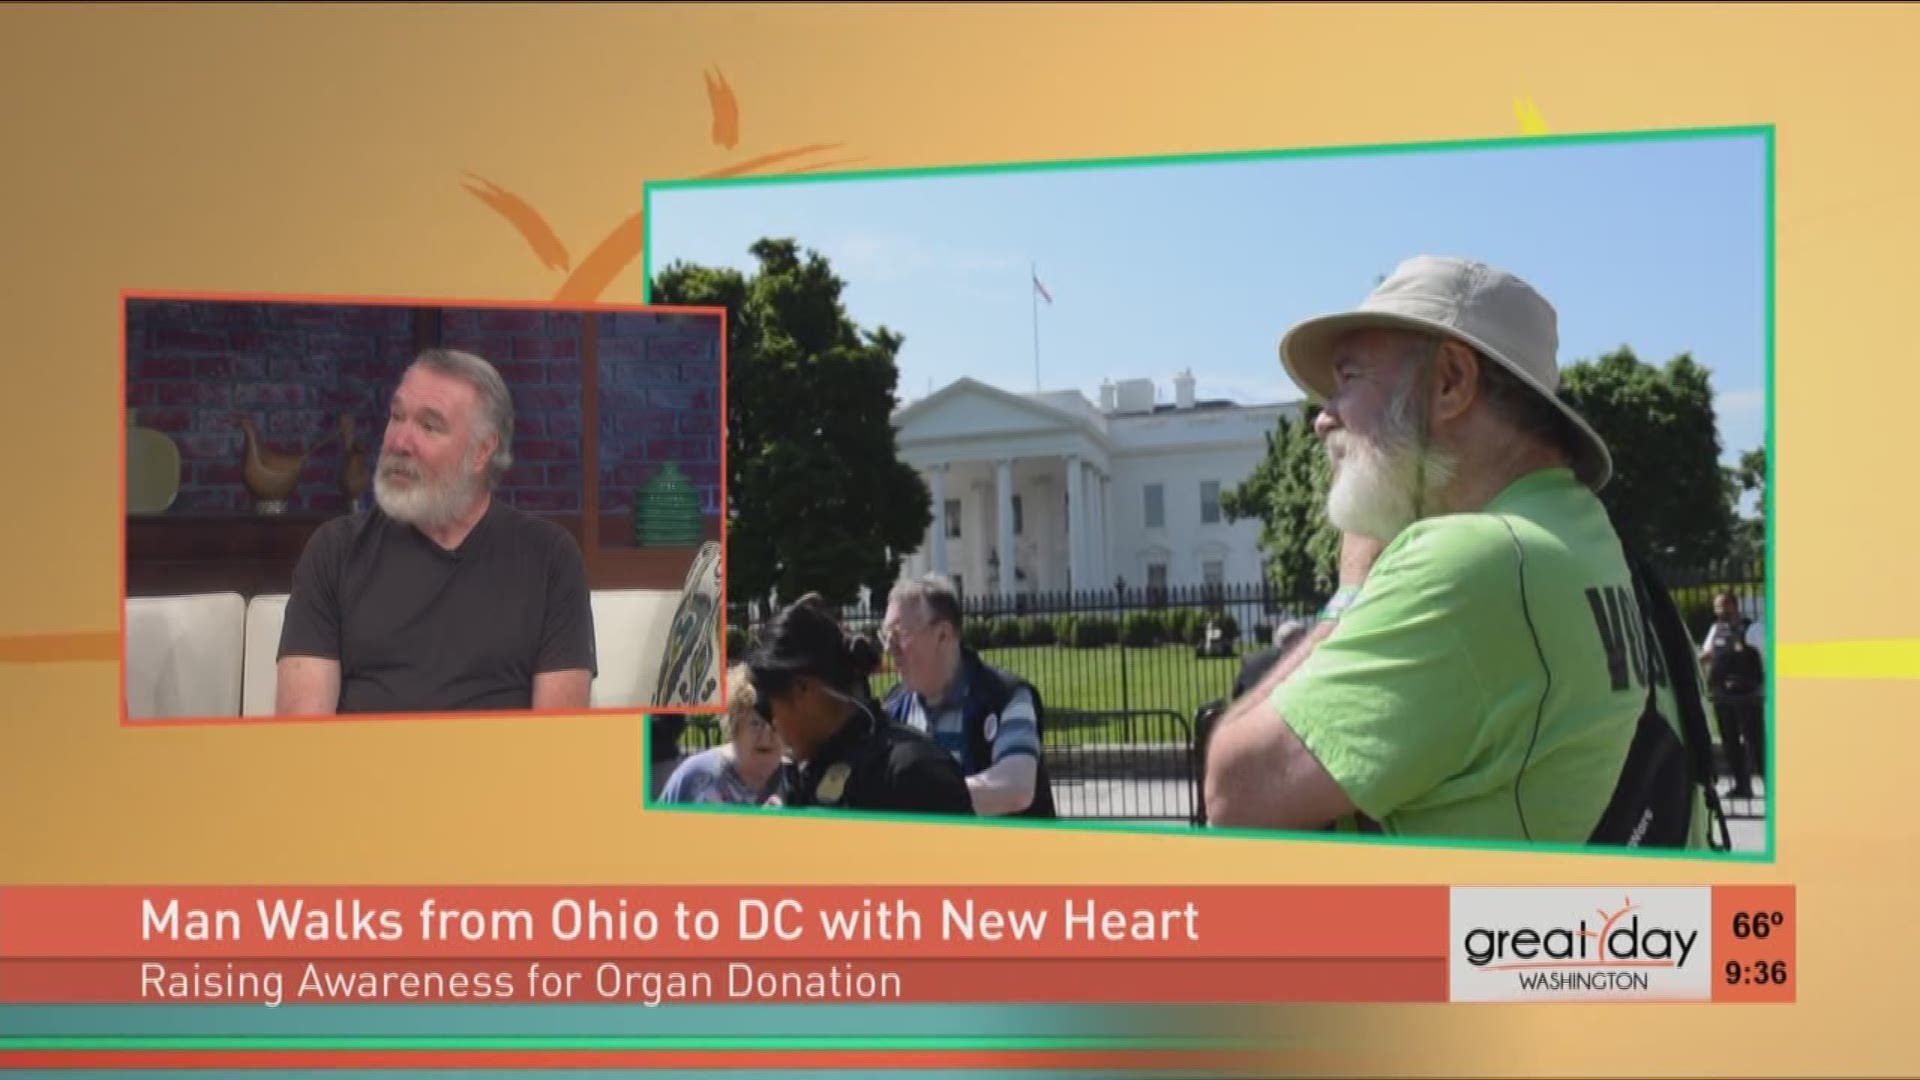 Gene Shimandle spent his life saving lives, and the heart transplant recipient walked from Ohio to DC to spread the message of organ donation awareness.